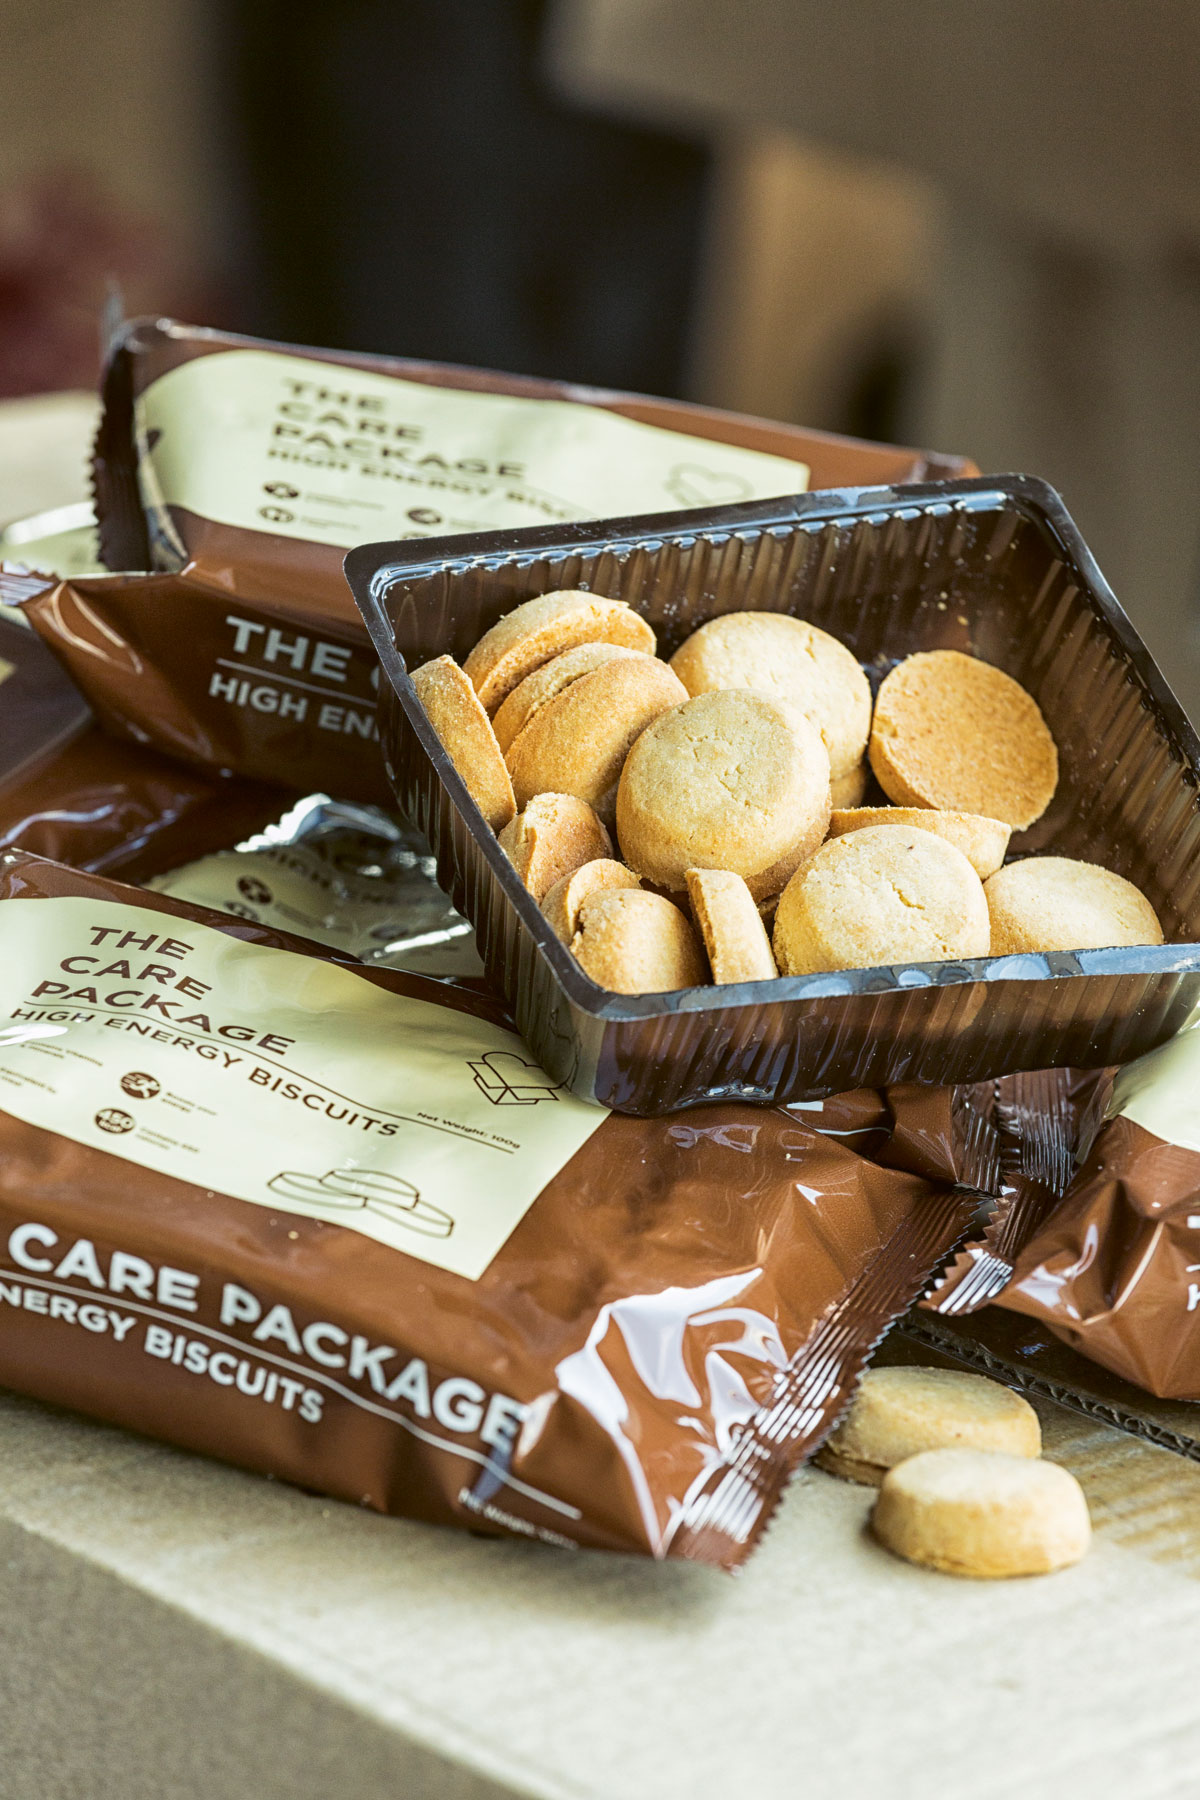 A pack of biscuits promises not just immediate nourishment but also relief from calamity